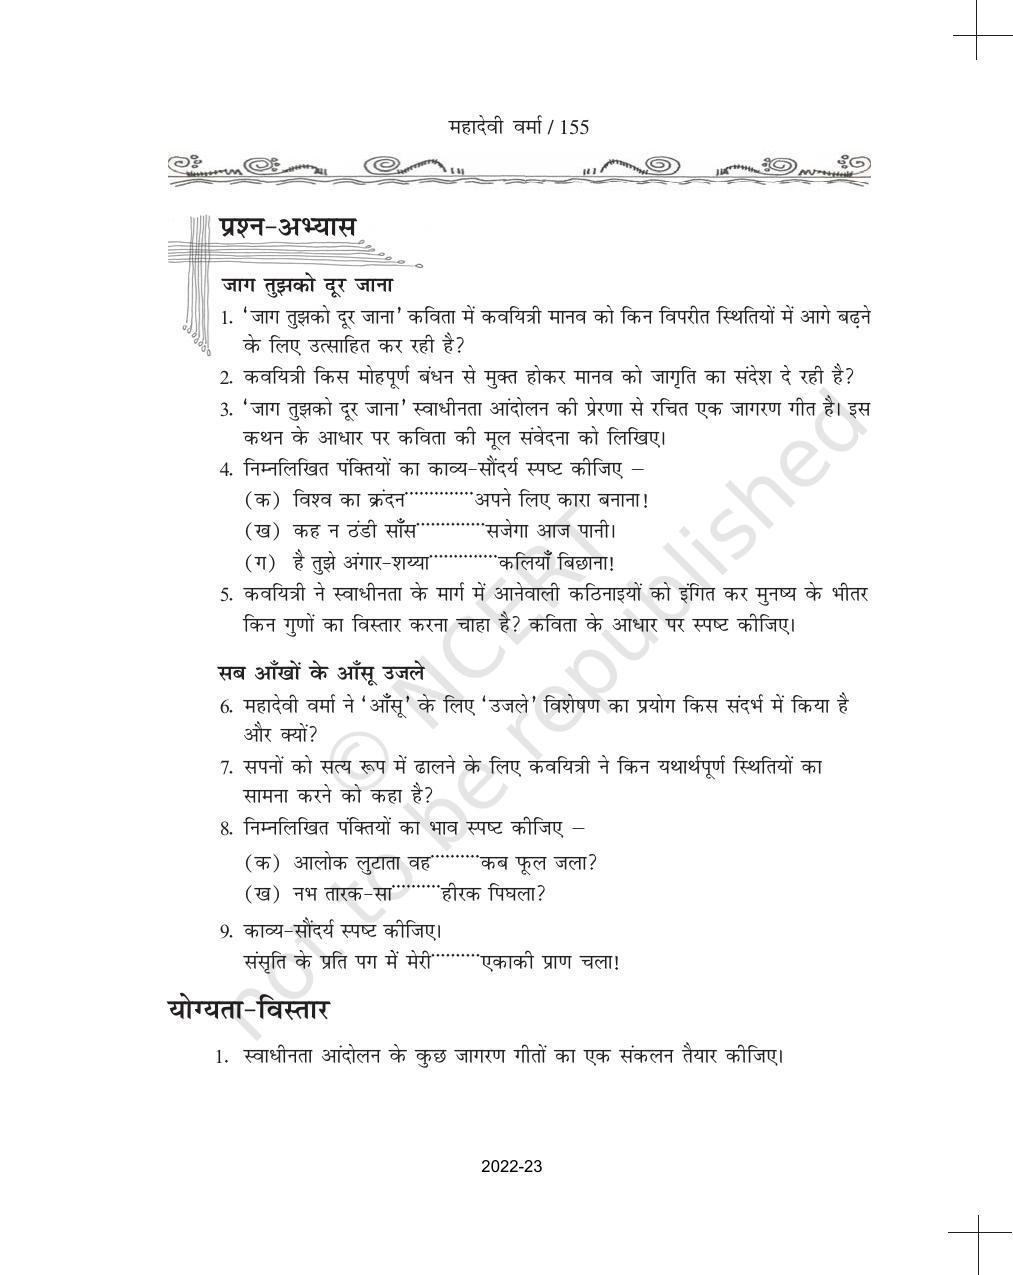 NCERT Book for Class 11 Hindi Antra Chapter 15 महादेवी वर्मा - Page 6